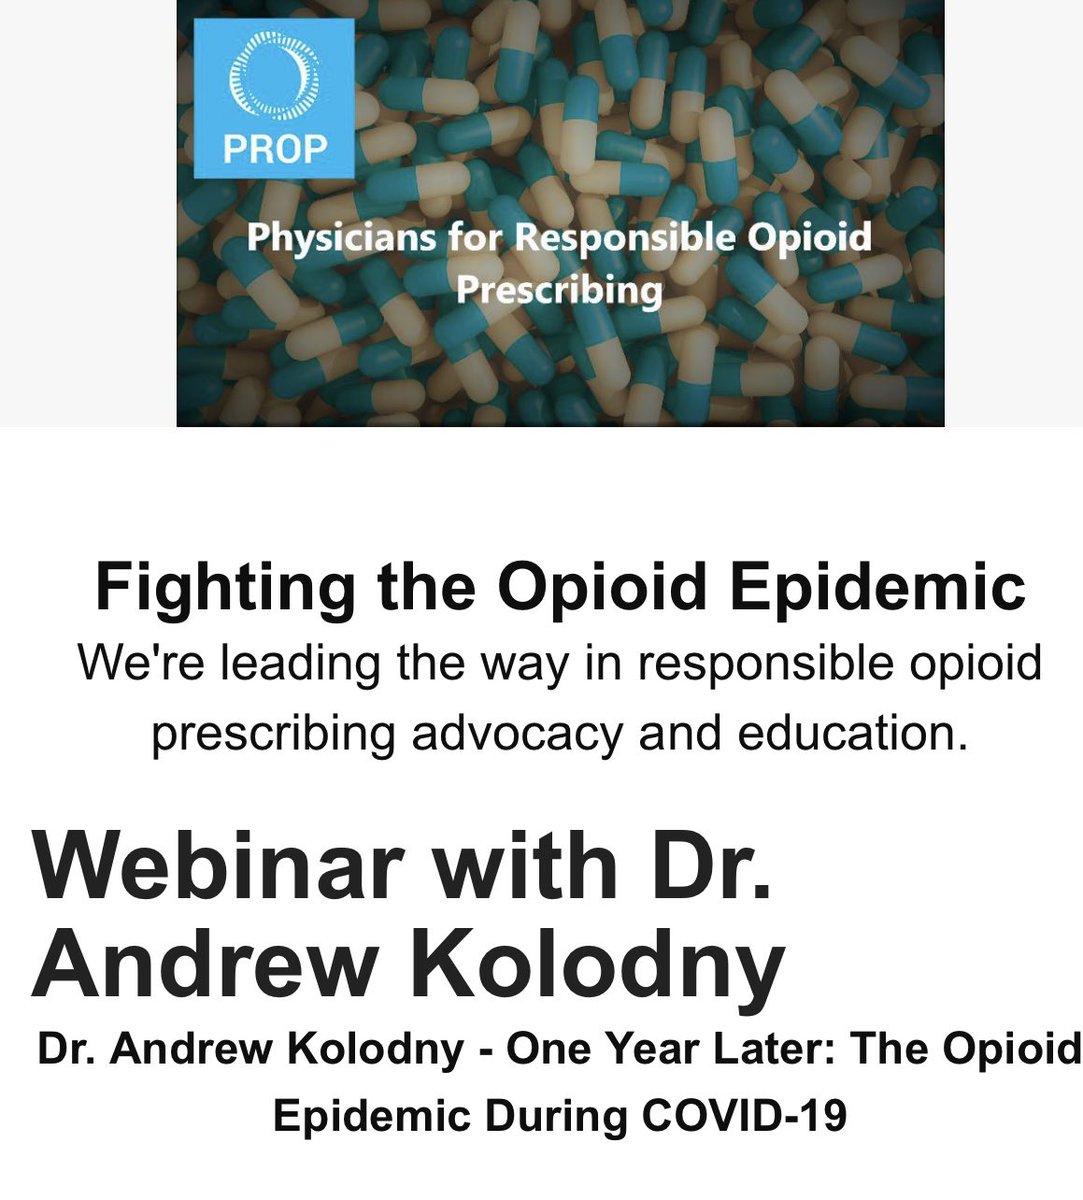 The truth of course is that  @supportprop is an anti-opioid, anti-patient activist group with extreme views about opioid prescribing. It’s founder,  #AndrewKolodny is arguably a self-interested hack who reportedly never completed postgrad fellowship training in pain management 1/3